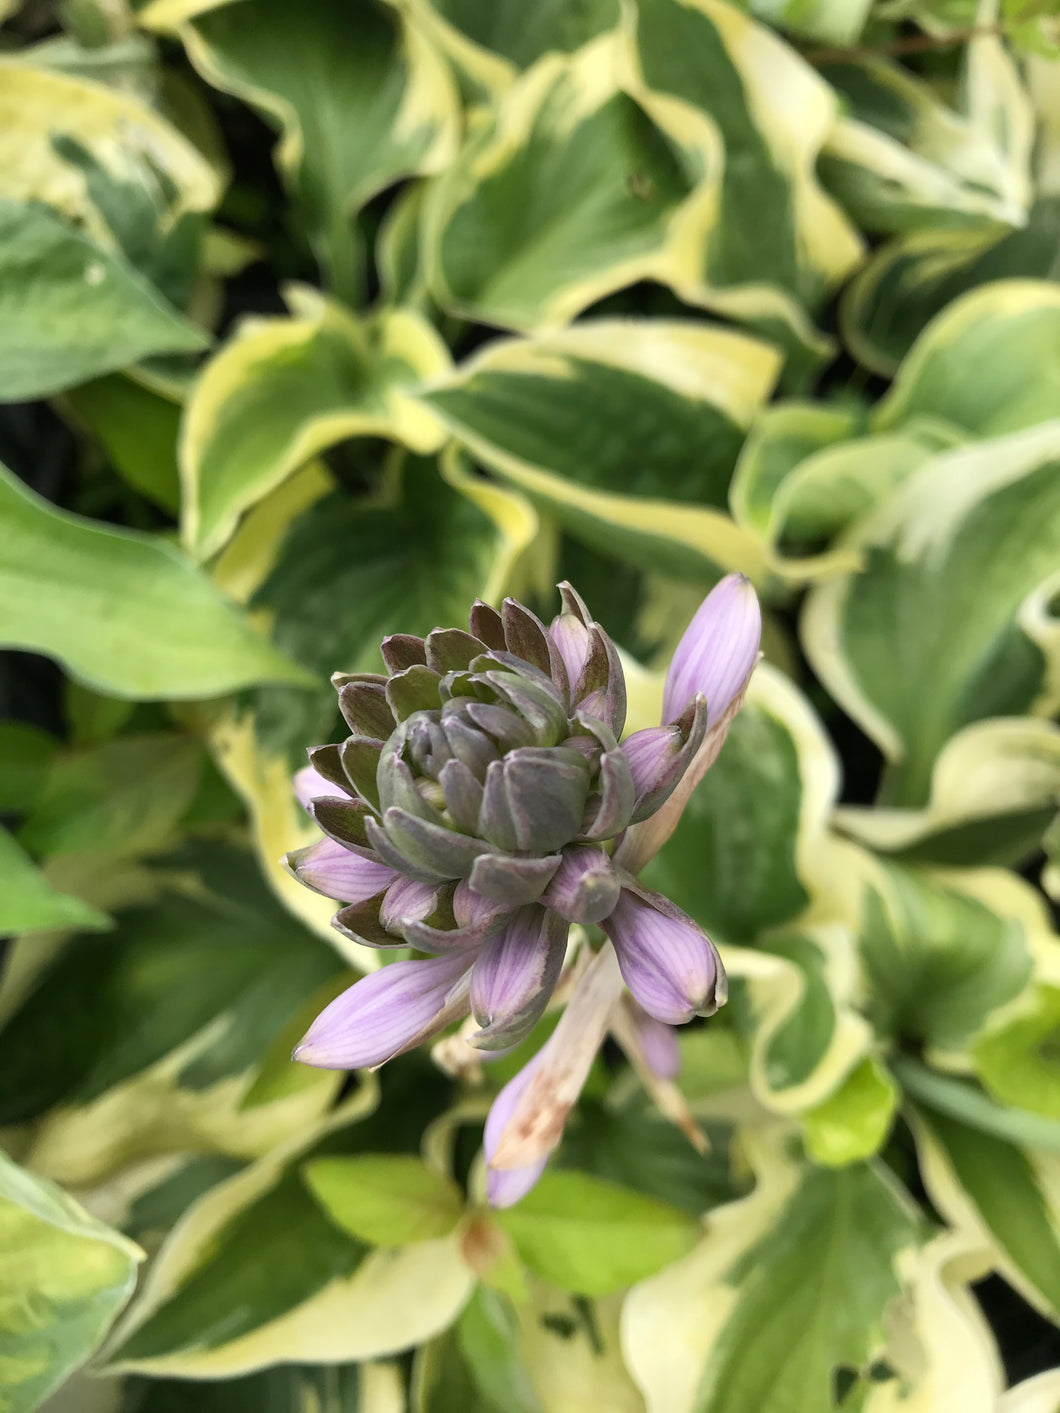 1 bare root of Hosta (Wide Brim) Includes Postage